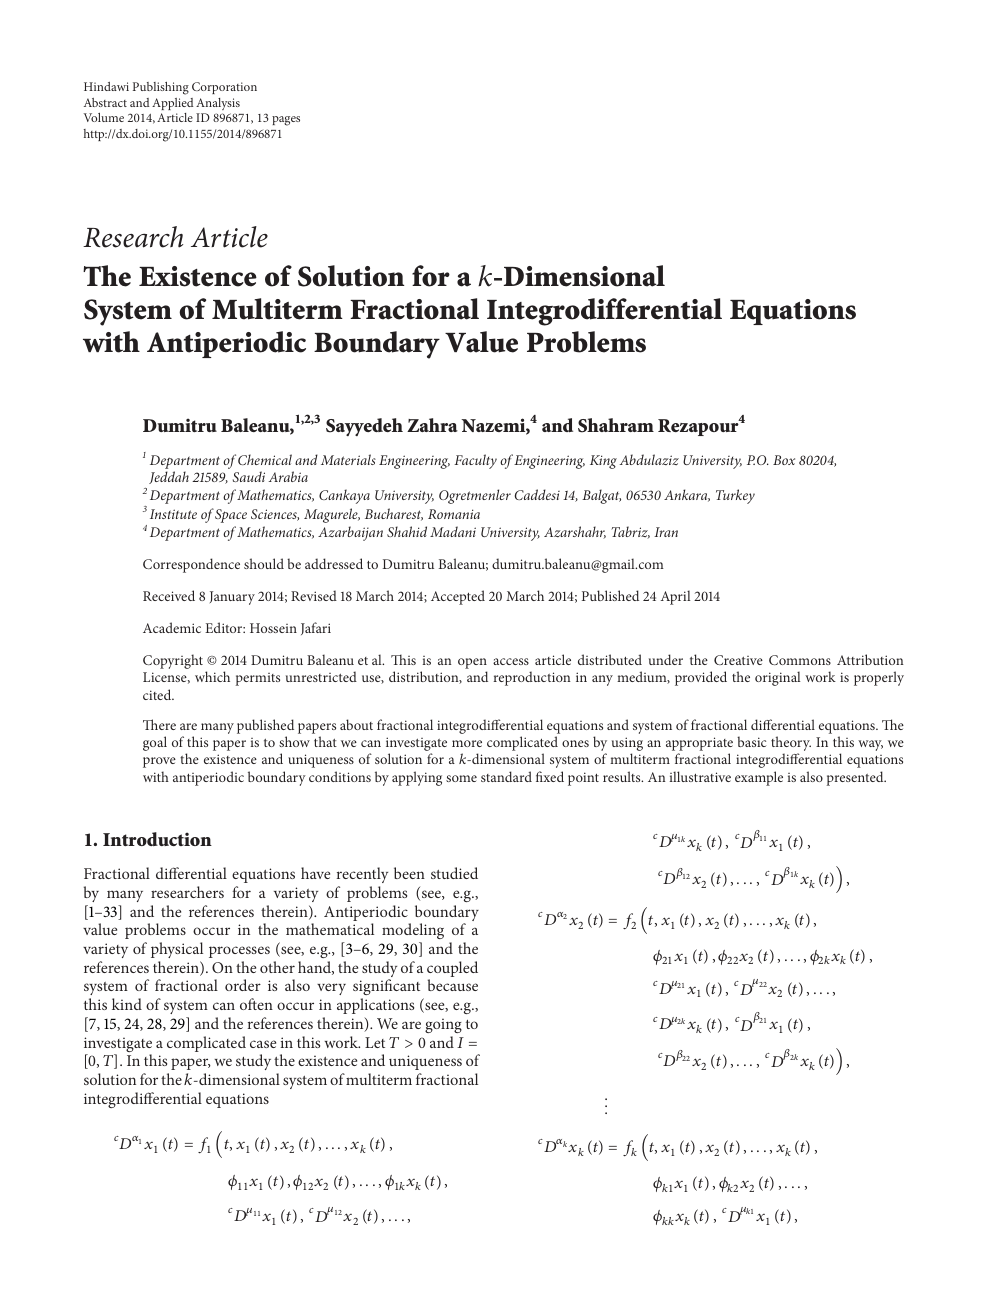 The Existence Of Solution For A K Dimensional System Of Multiterm Fractional Integrodifferential Equations With Antiperiodic Boundary Value Problems Topic Of Research Paper In Mathematics Download Scholarly Article Pdf And Read